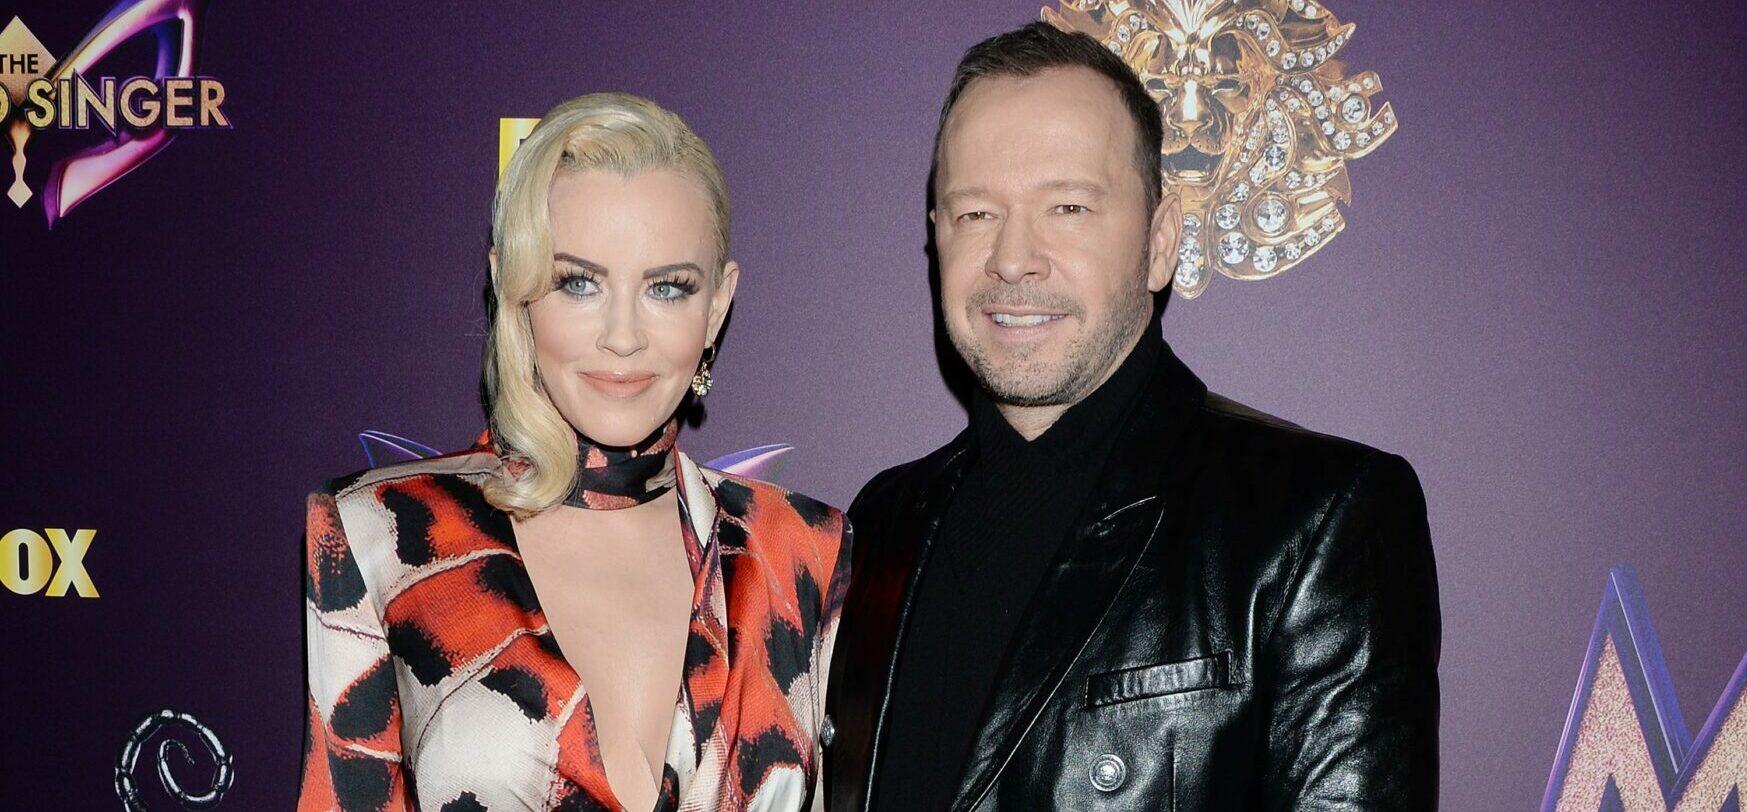 Jenny McCarthy and Donnie Wahlberg